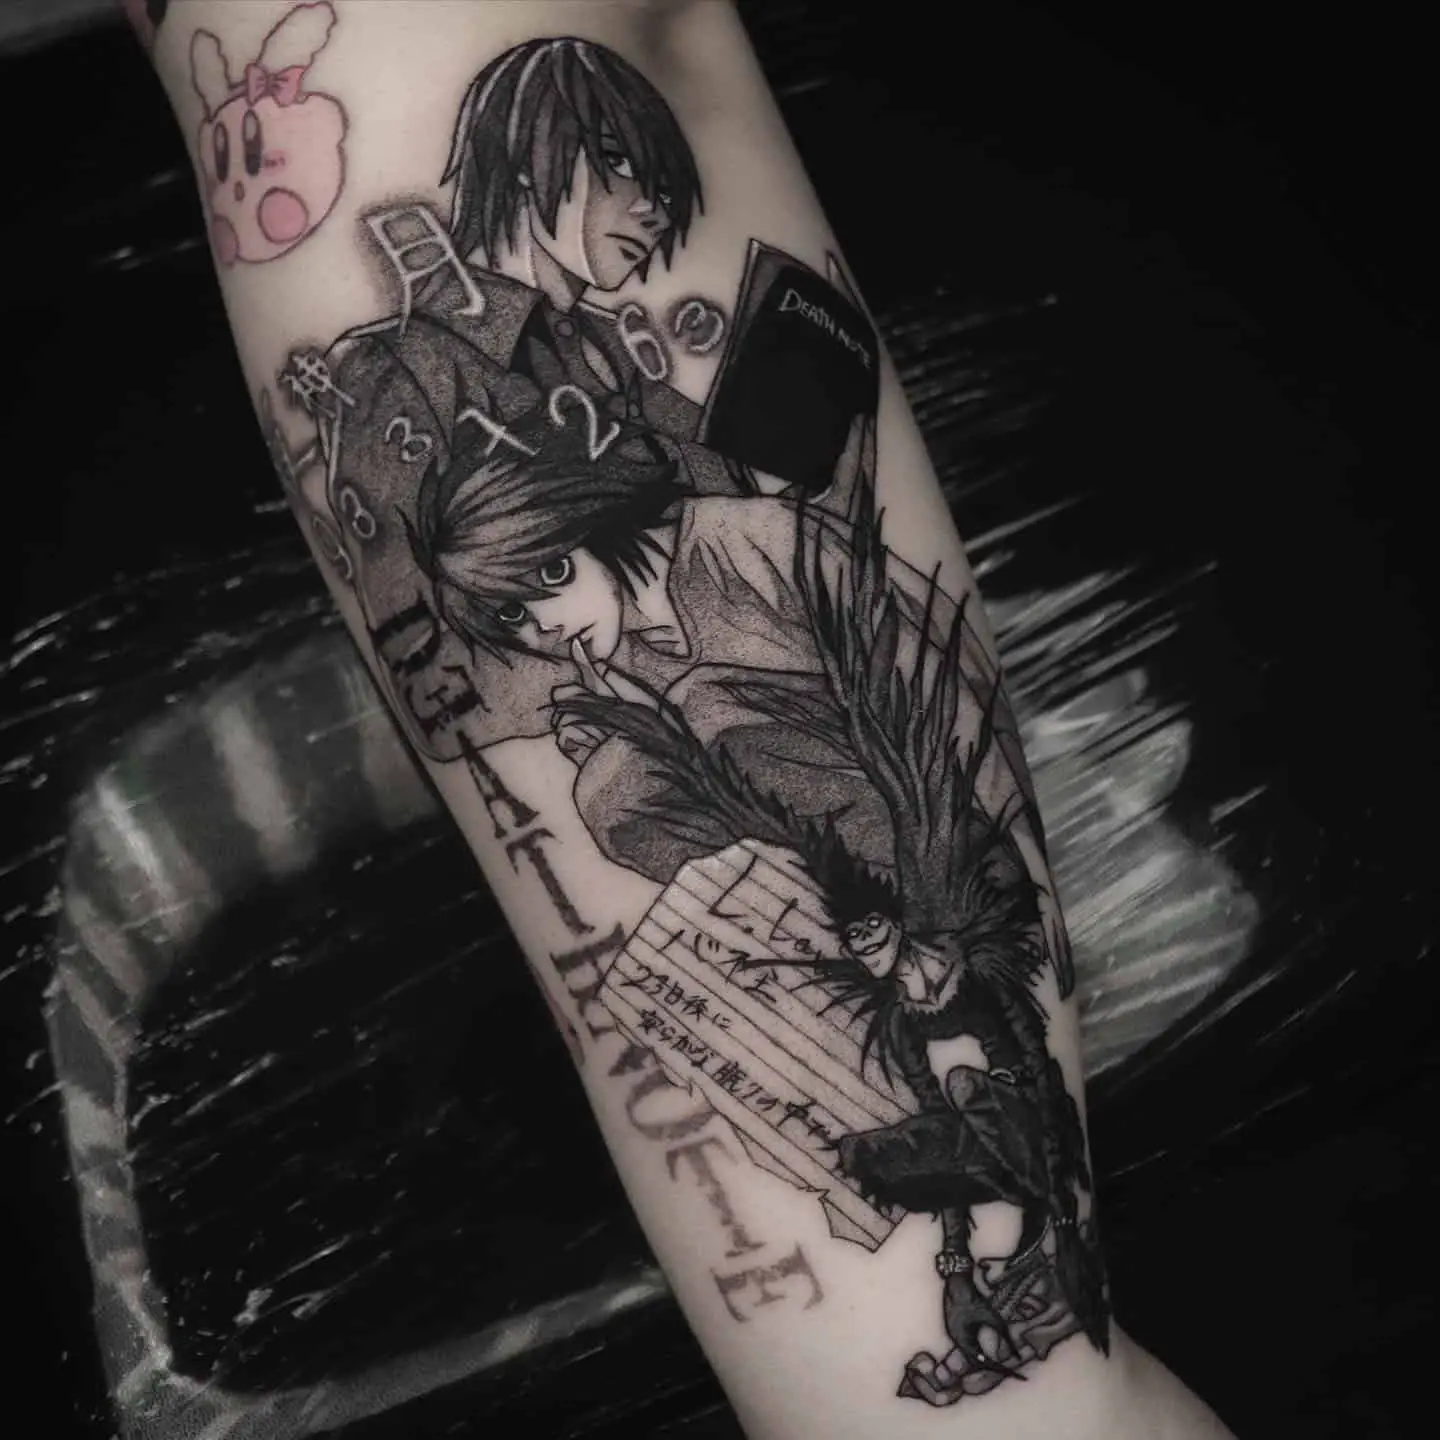 Death note tattoo by noa.fairytale